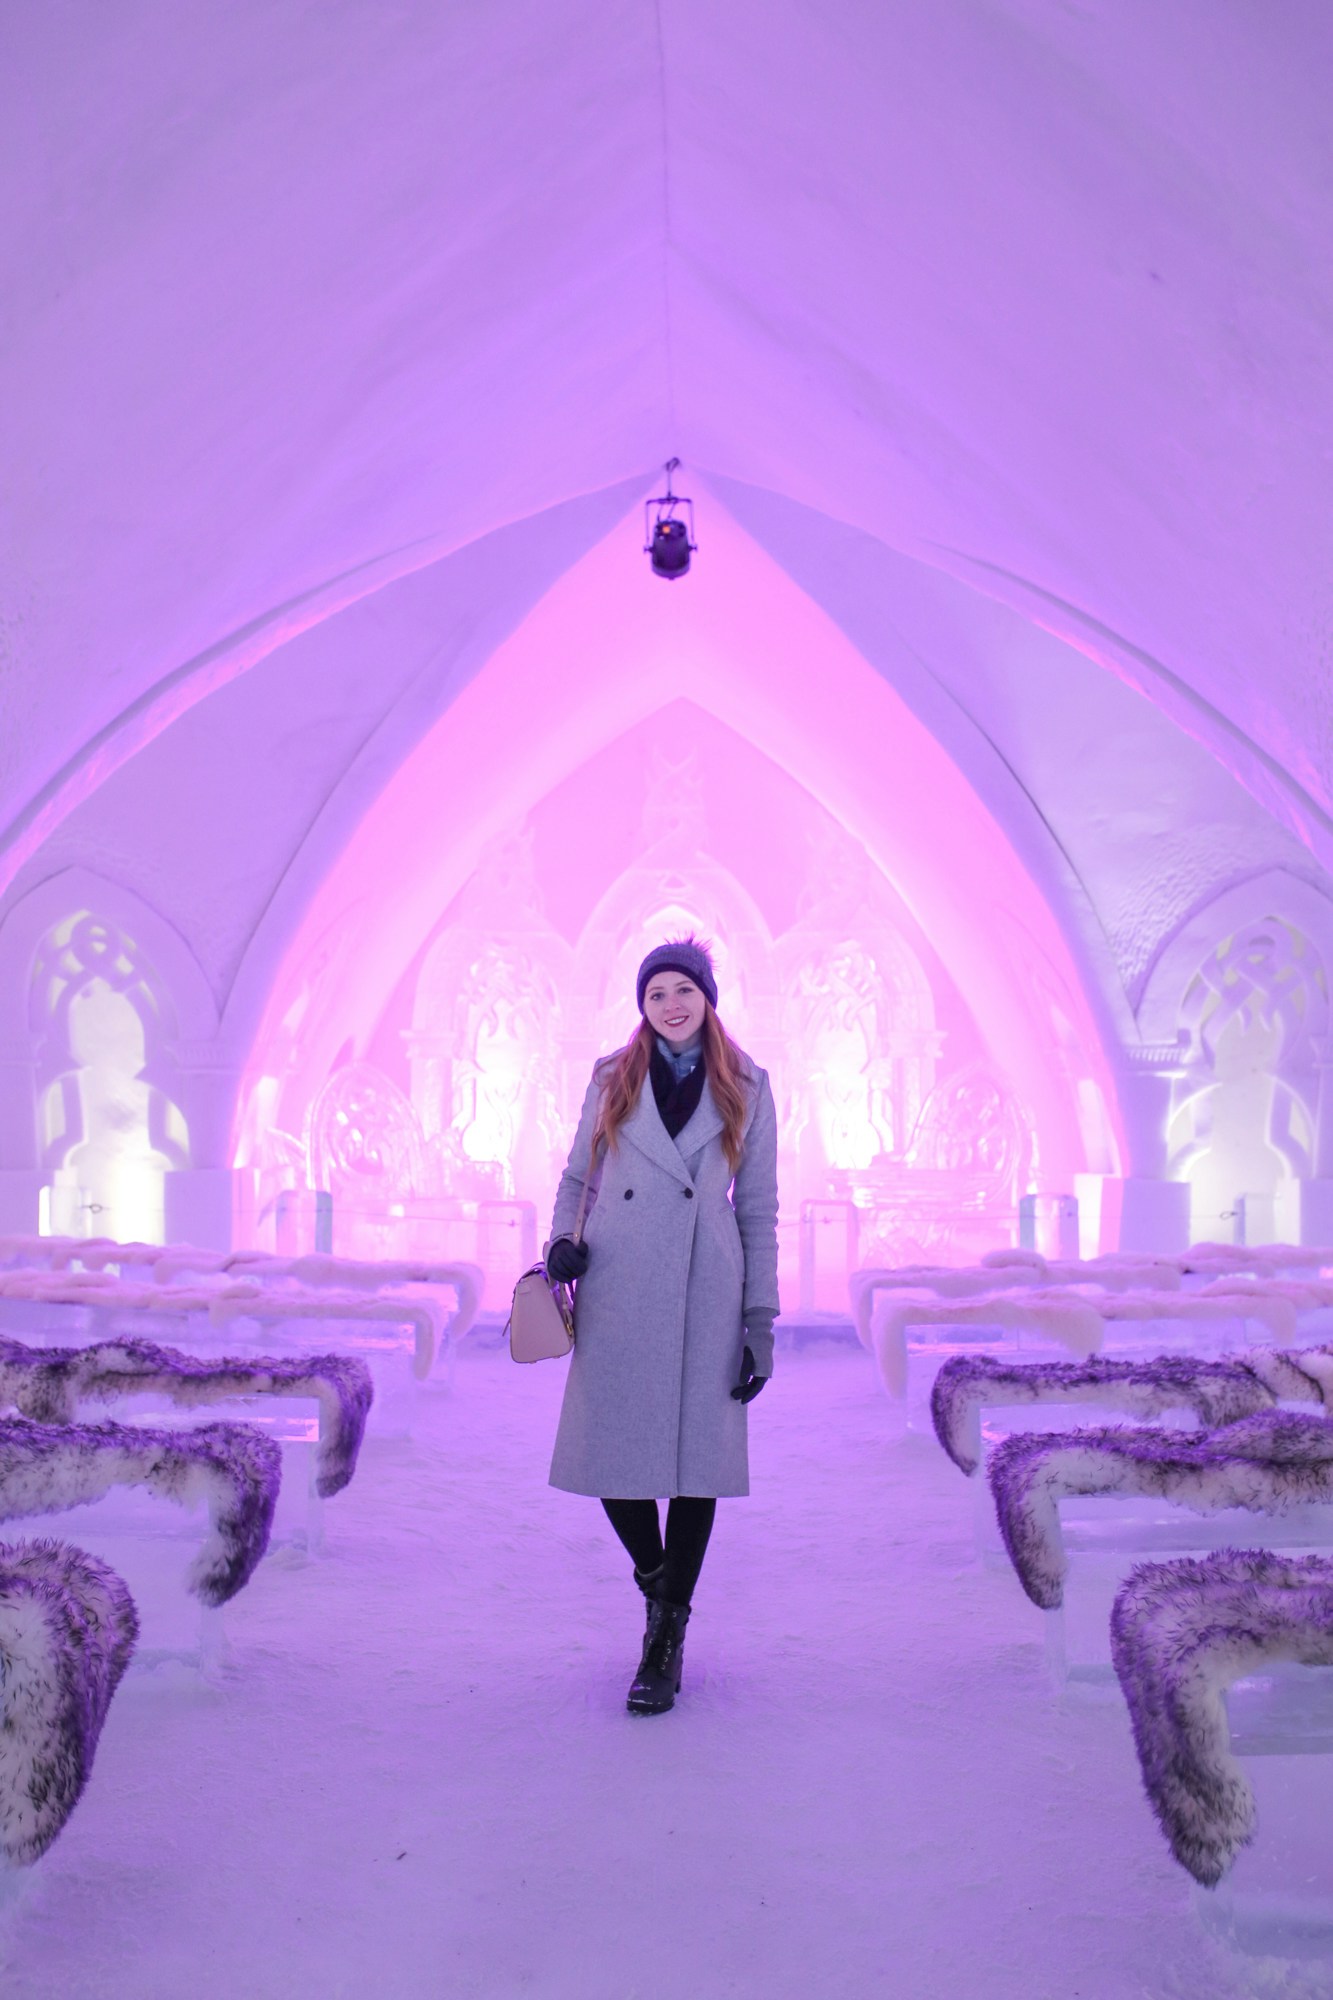 Hotel de Glâce in Valcartier near Quebec City is a must-see. This chapel is made entirely of ice and snow, and is so beautiful with LED lights and cozy fur seats.